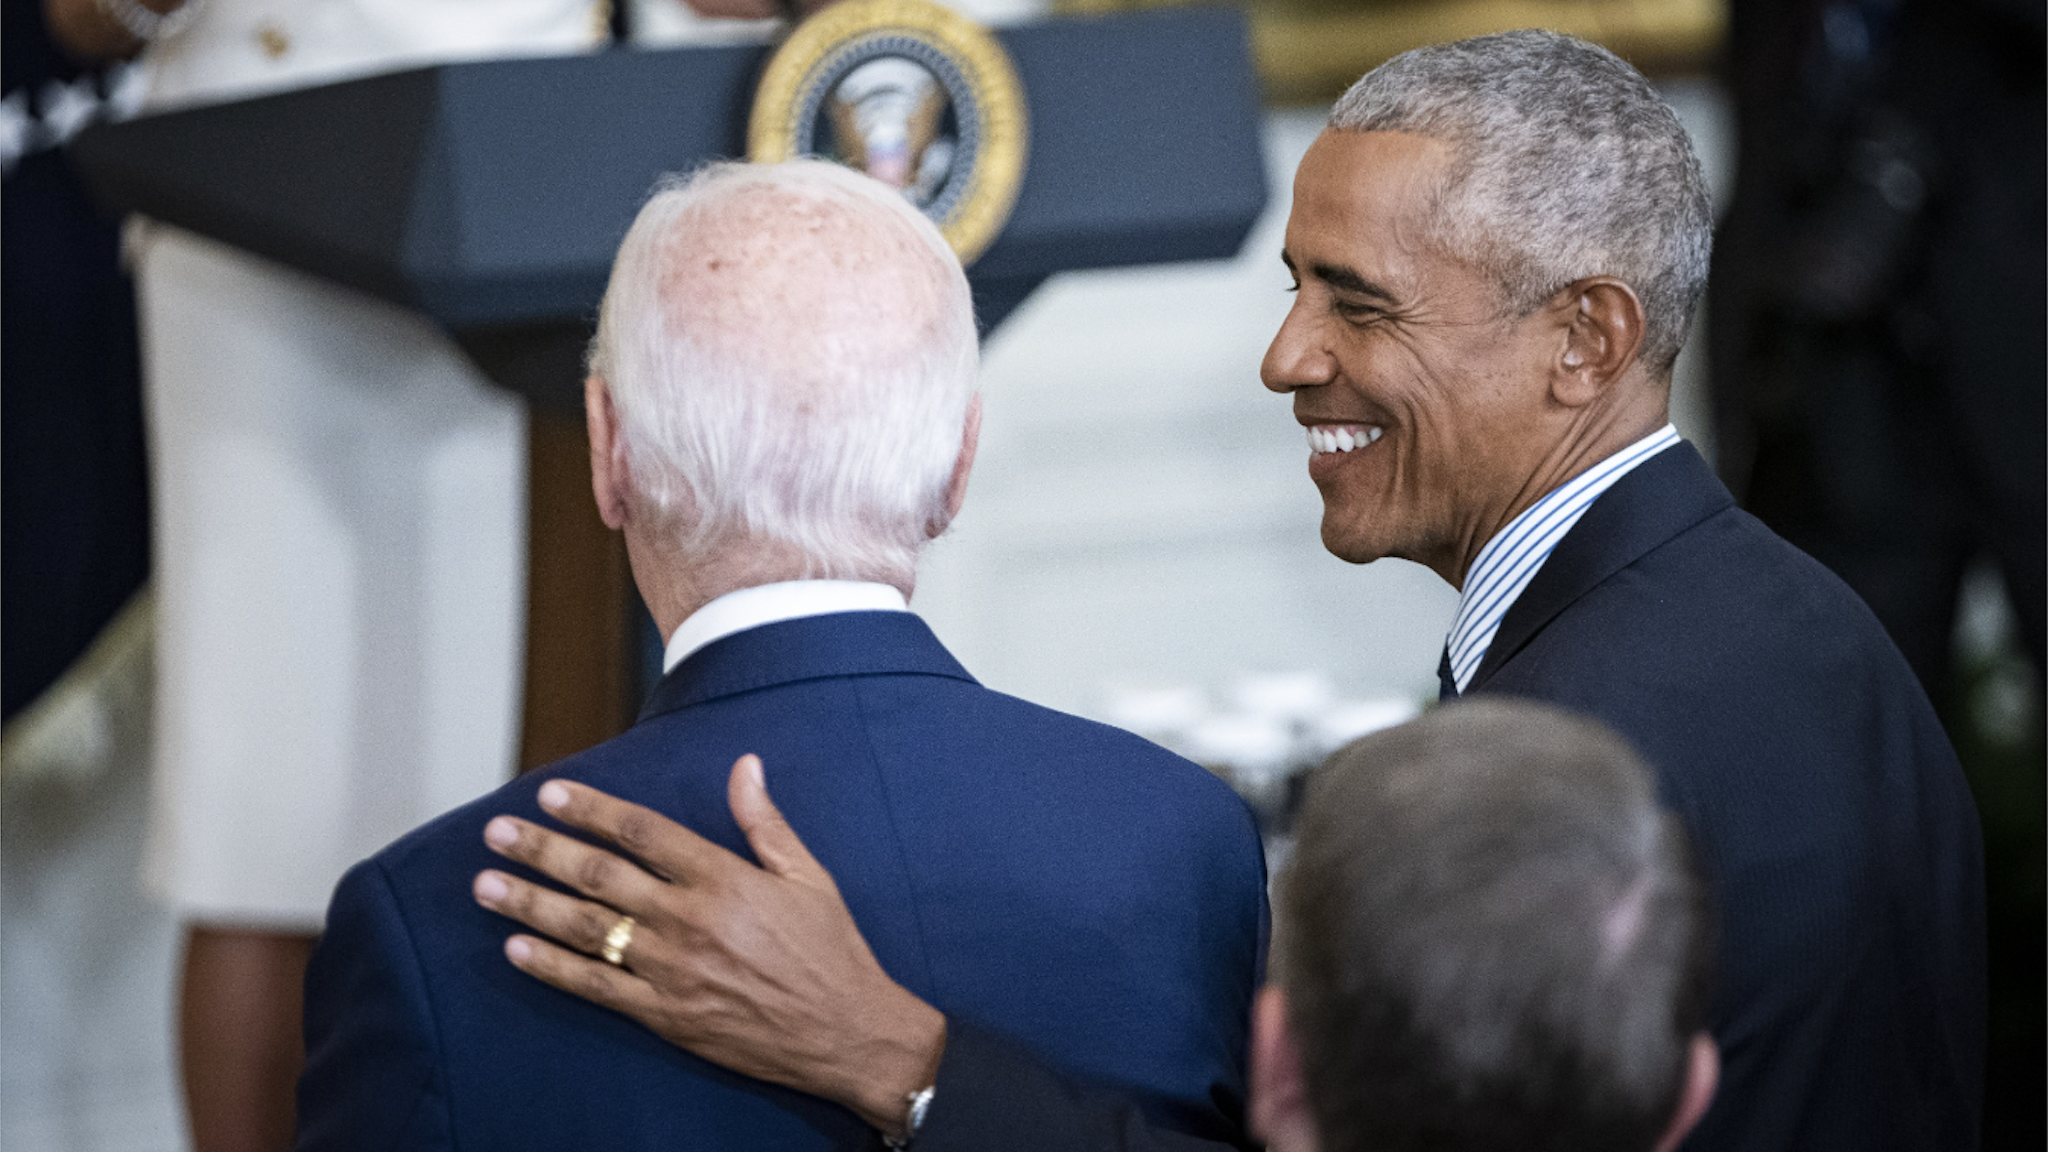 Former US President Barack Obama, right, embraces US President Joe Biden during a ceremony for the unveiling of his official White House portrait in Washington, D.C., US, on Wednesday, Sept. 7, 2022. The portraits of Barack Obama and Michelle Obama, acquired and commissioned by the White House Historical Association, were painted by Robert McCurdy and Sharon Sprung, respectively.